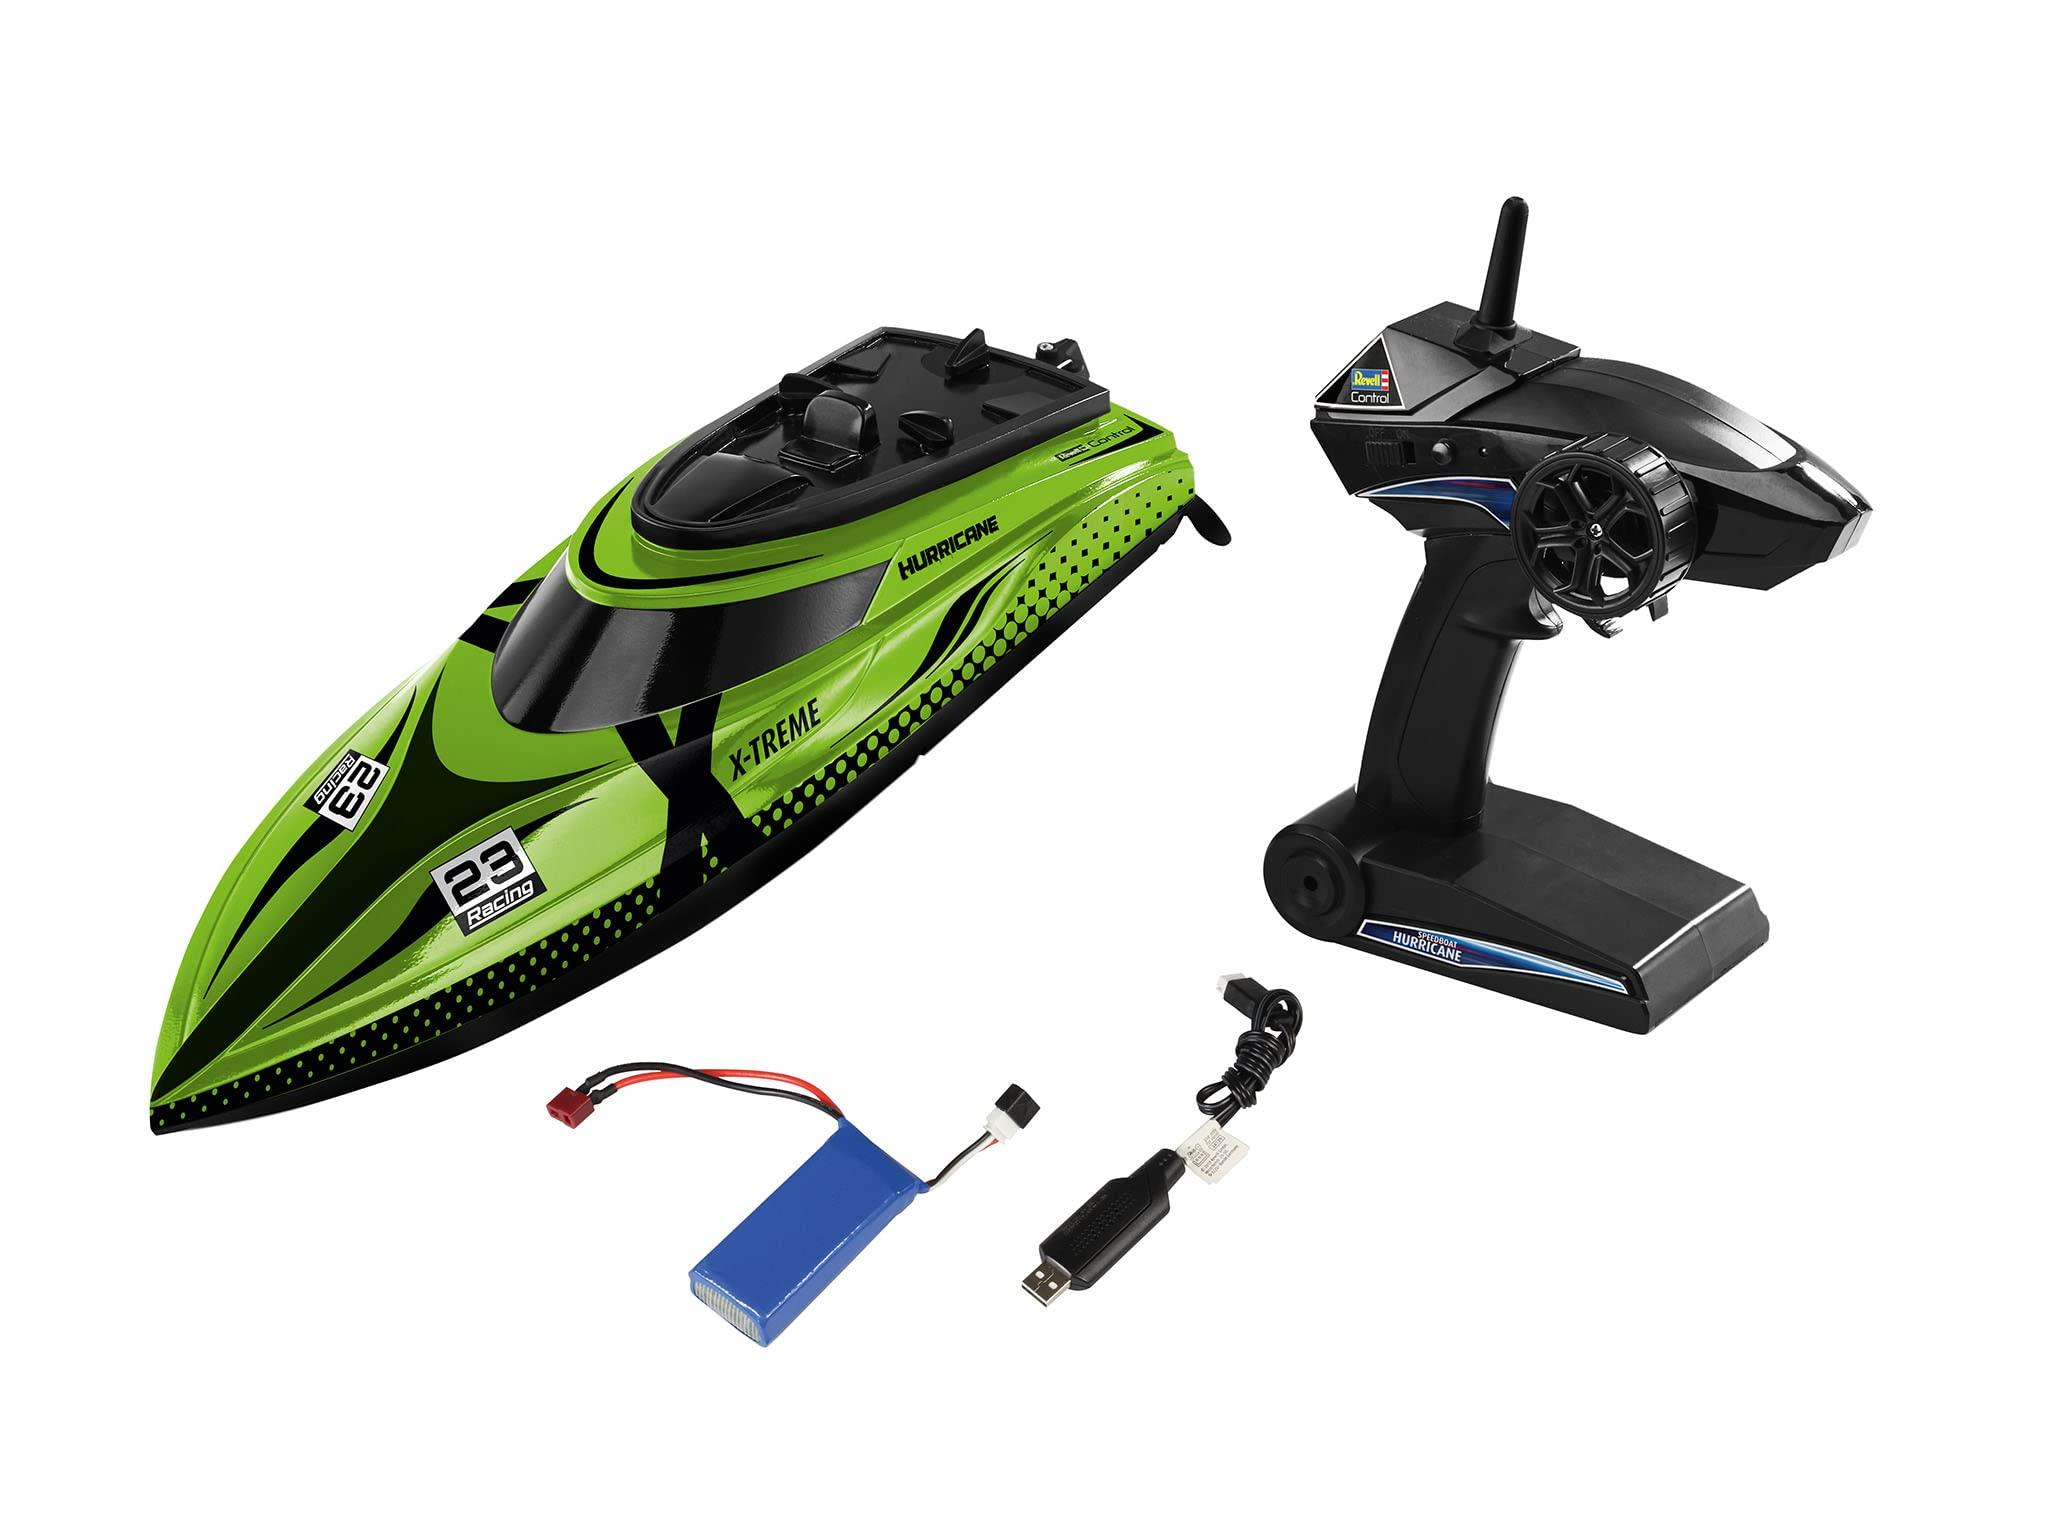 Hurricane Rc Boat: Outstanding Performance and Design Features.